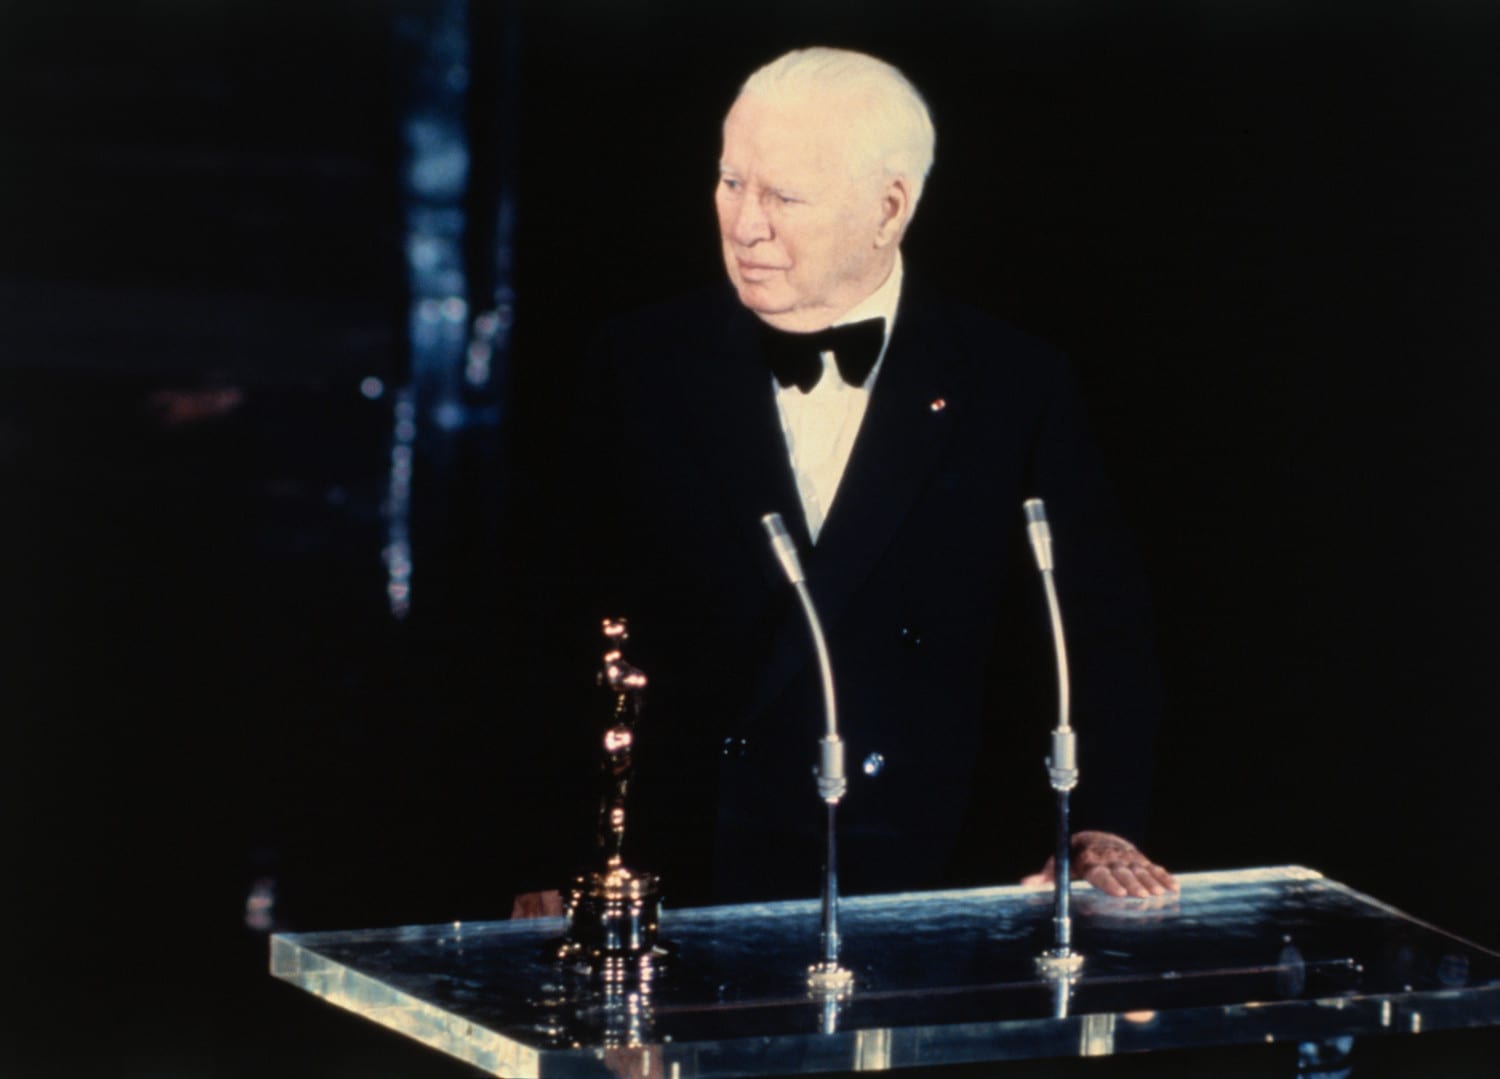 what was the name of the woman who appeared on behalf of marlon brando at the 1972 oscar telecast